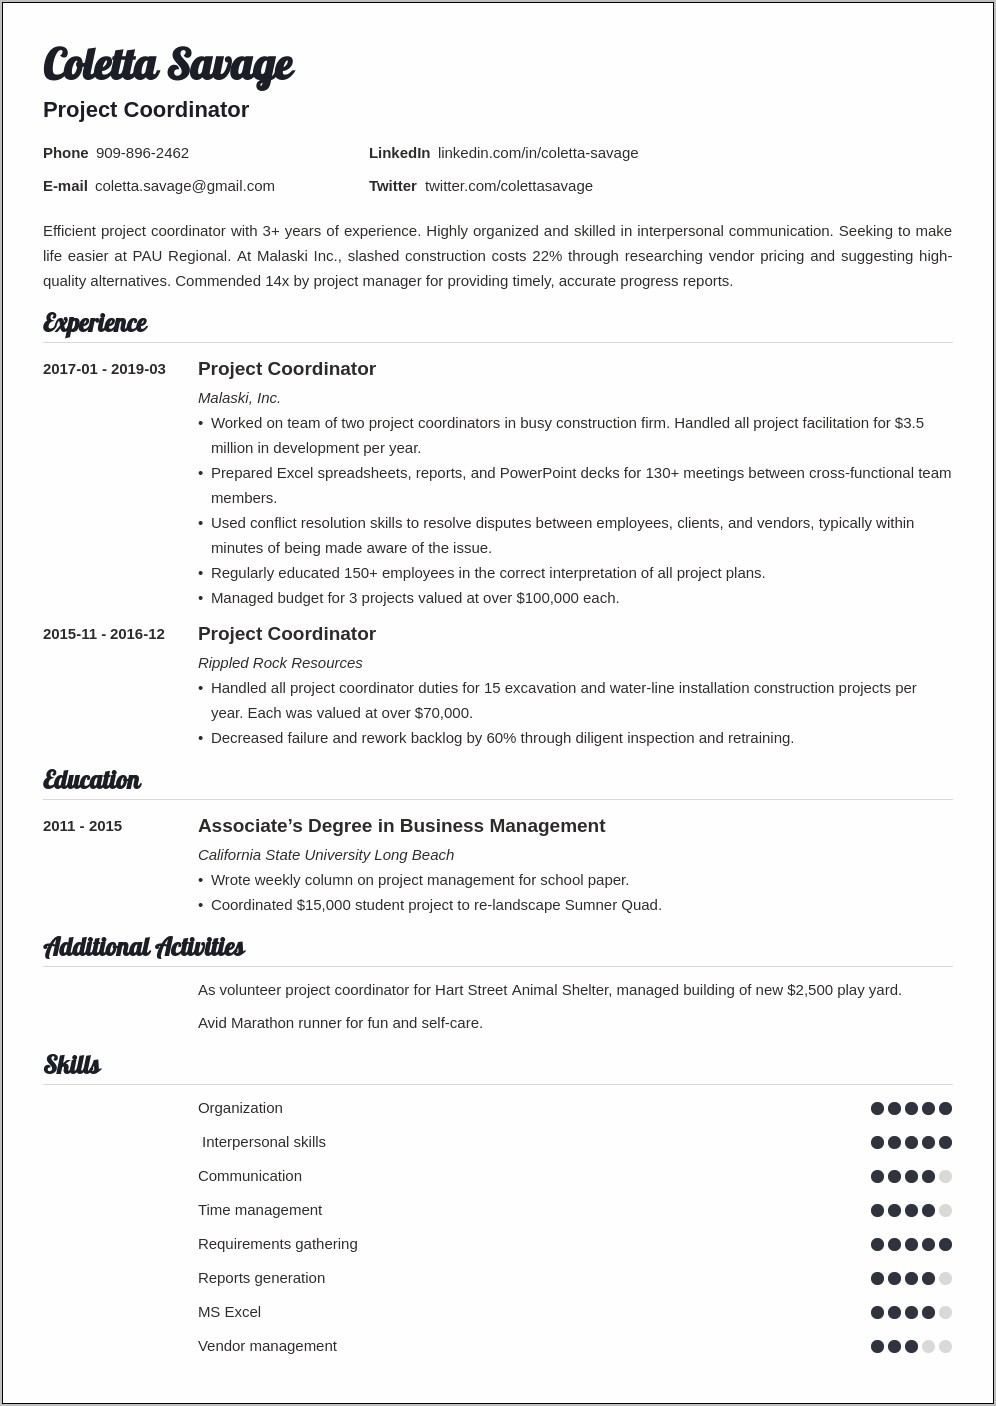 Resume Objective To Obtain Project